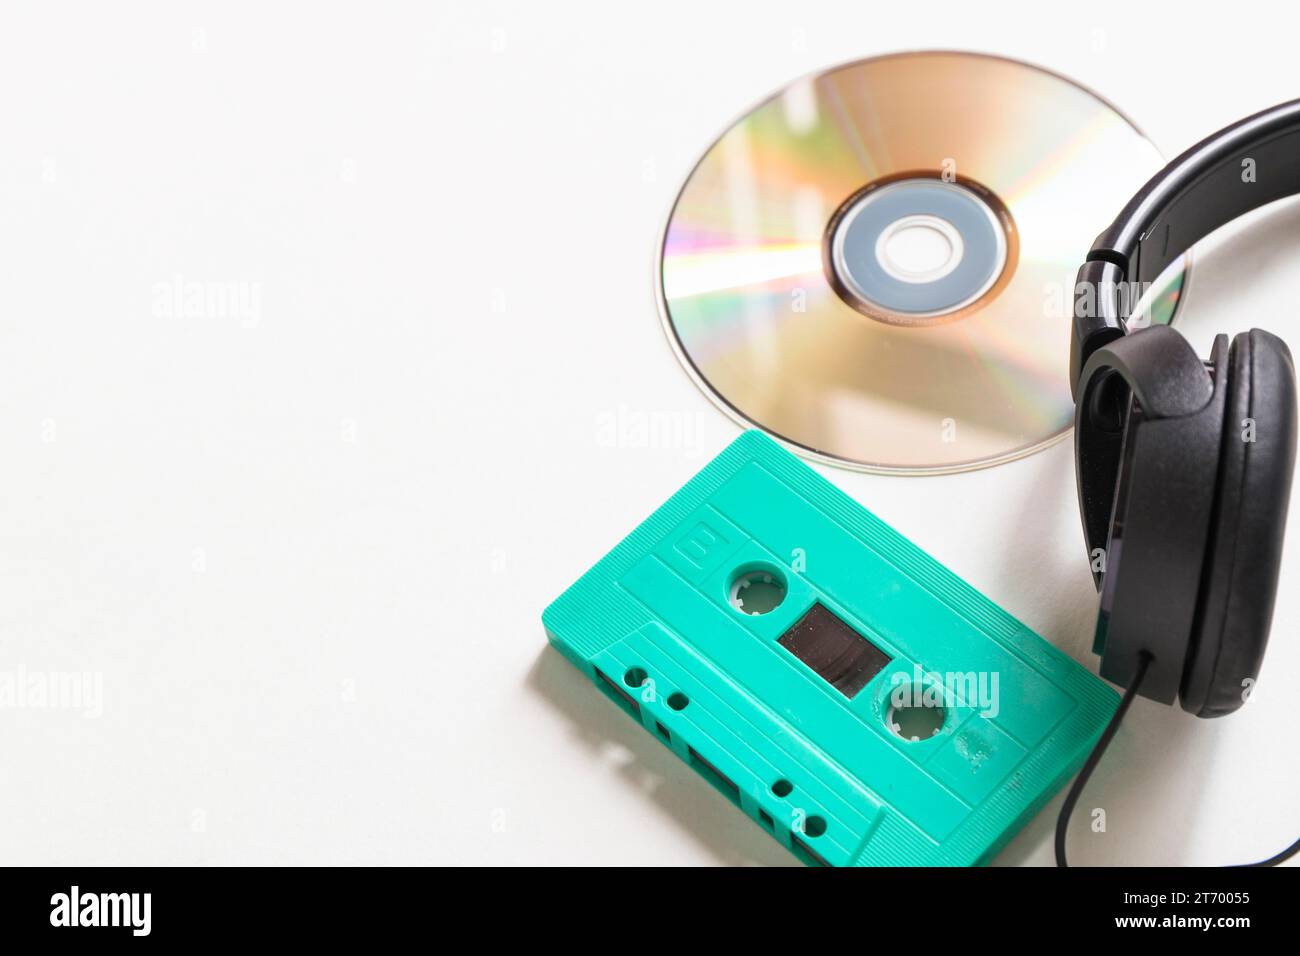 Compact disc turquoise cassette headphone white background Stock Photo